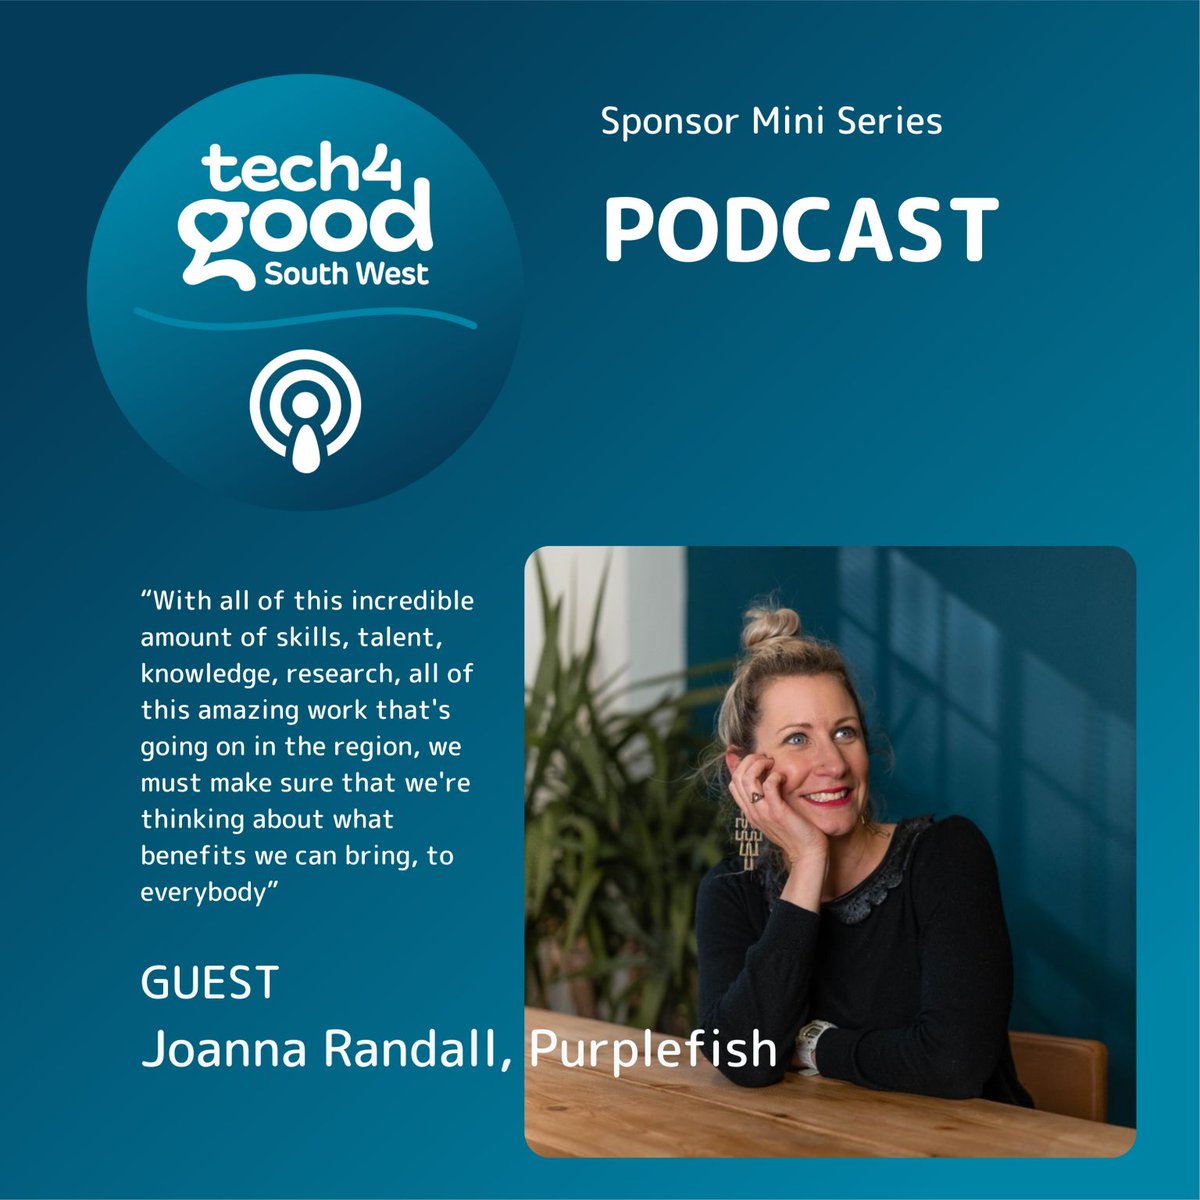 🎙️ Don't miss it! Tomorrow, our Founding Director Joanna Randall discusses Purplefish's commitment to #techforgood on @tech4goodSW podcast. Tune in for insights on our regional impact. Listen here: tech4goodsouthwest.org/podcast #Podcast #TechForGood